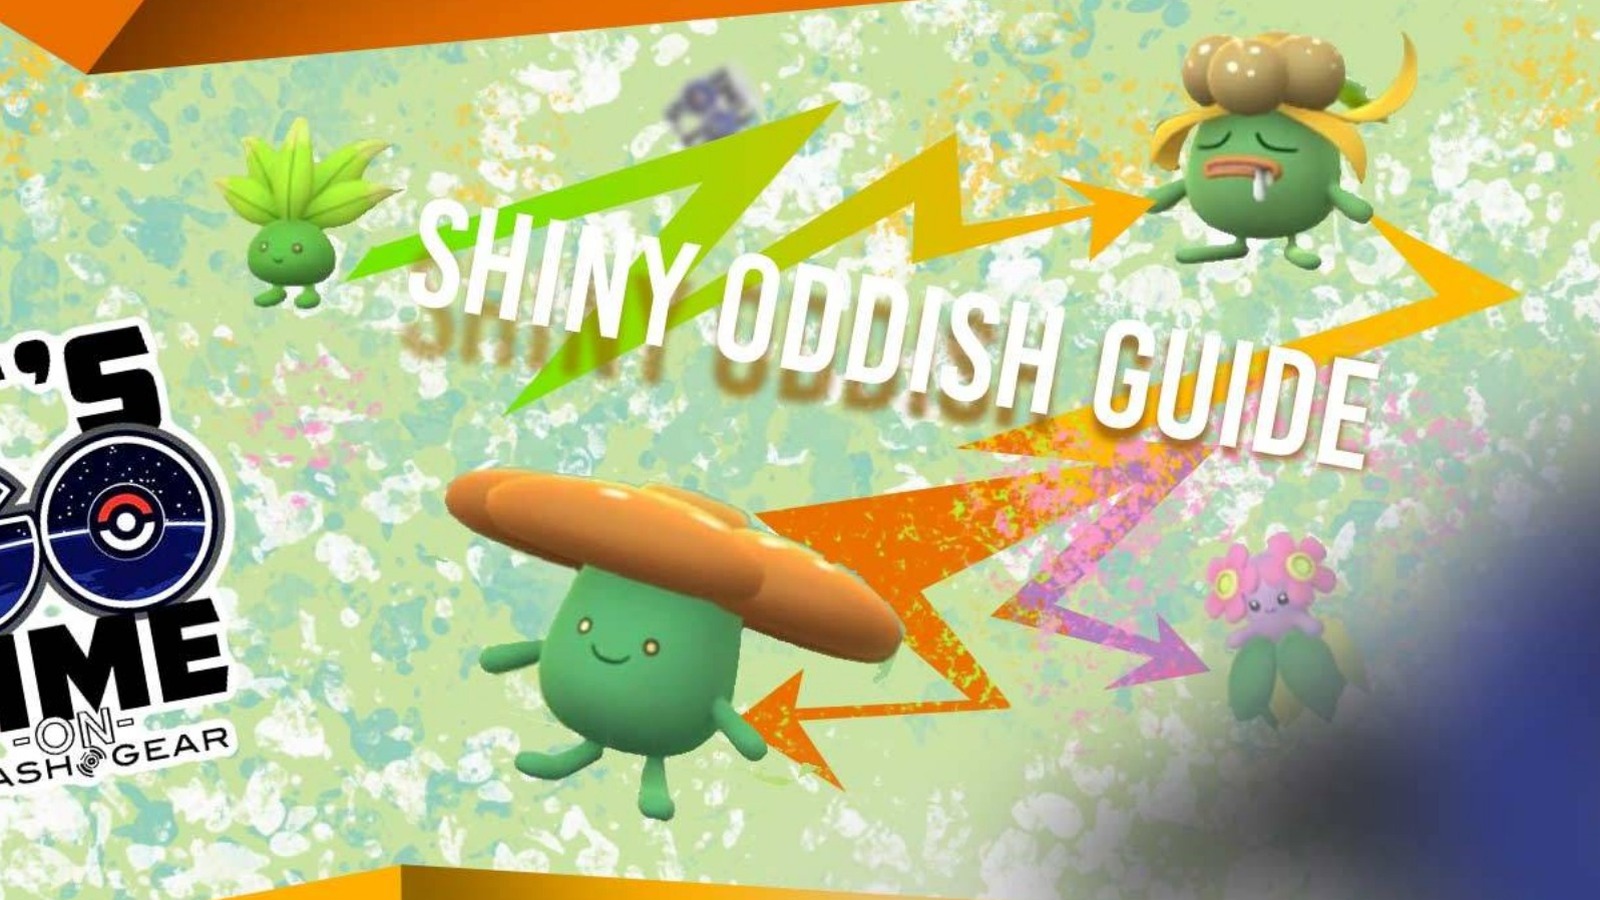 Shiny Oddish Pokemon GO Guide: Everything You Need To Know!